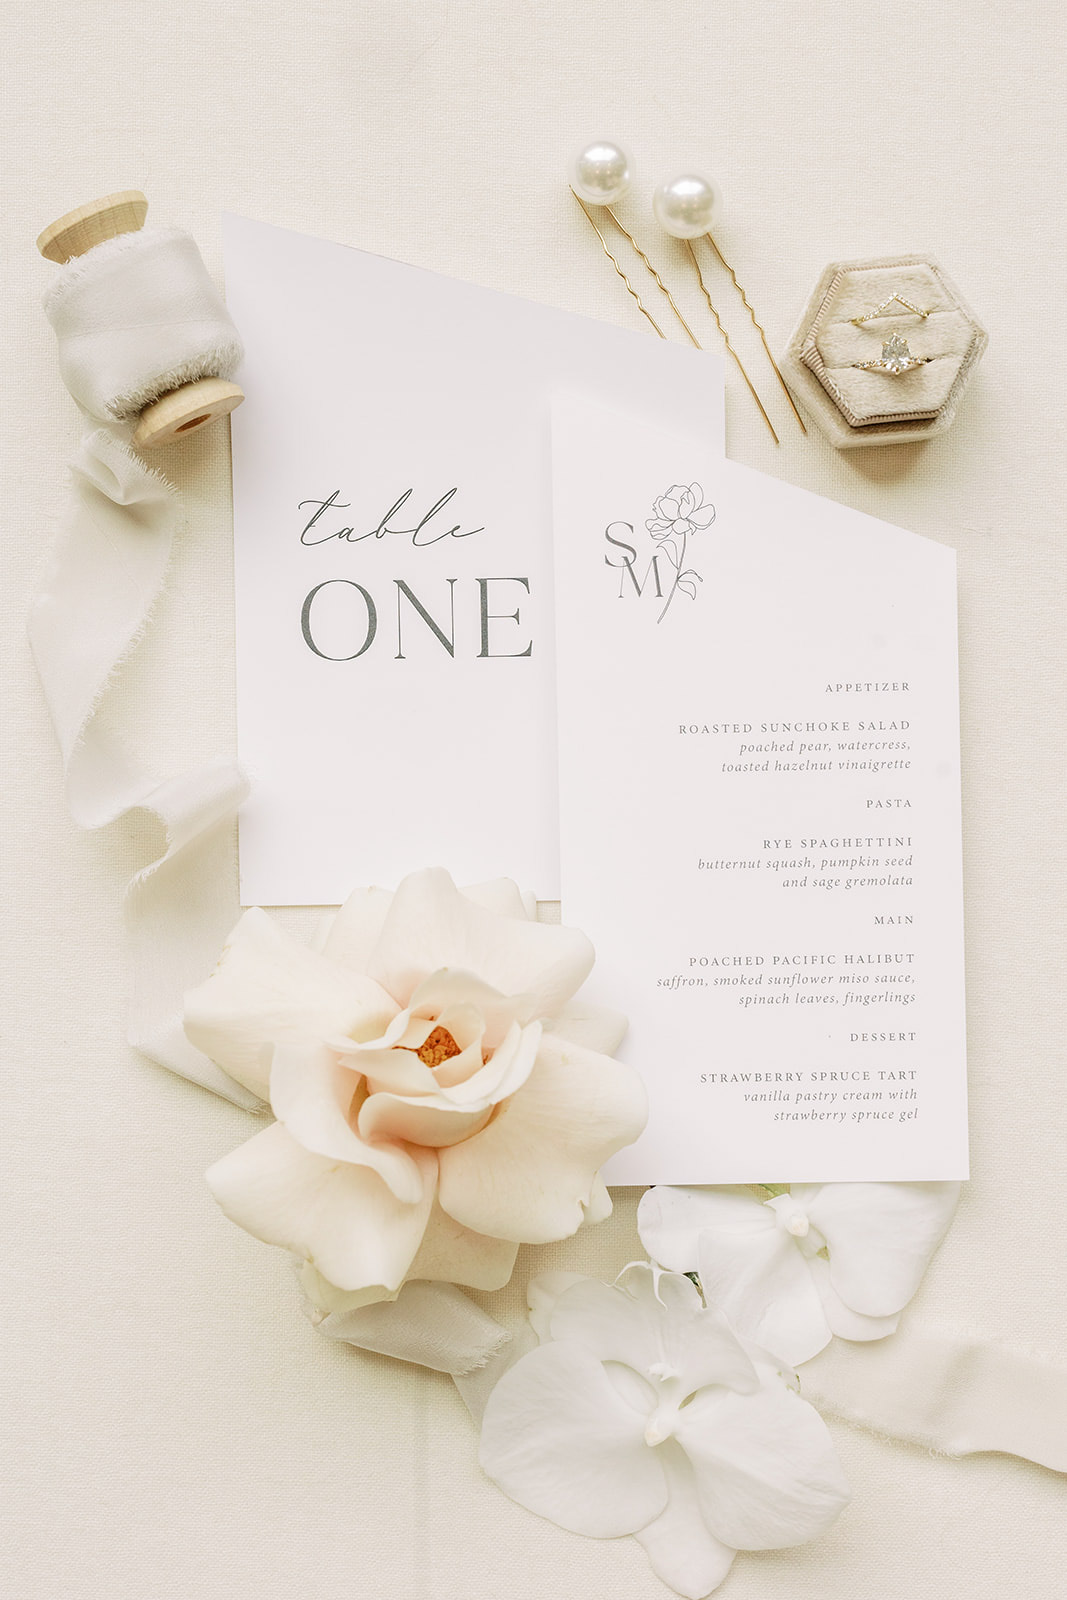 Detail photos of wedding stationary for Elora Mill Wedding Editorial featured in Wedding Chicks